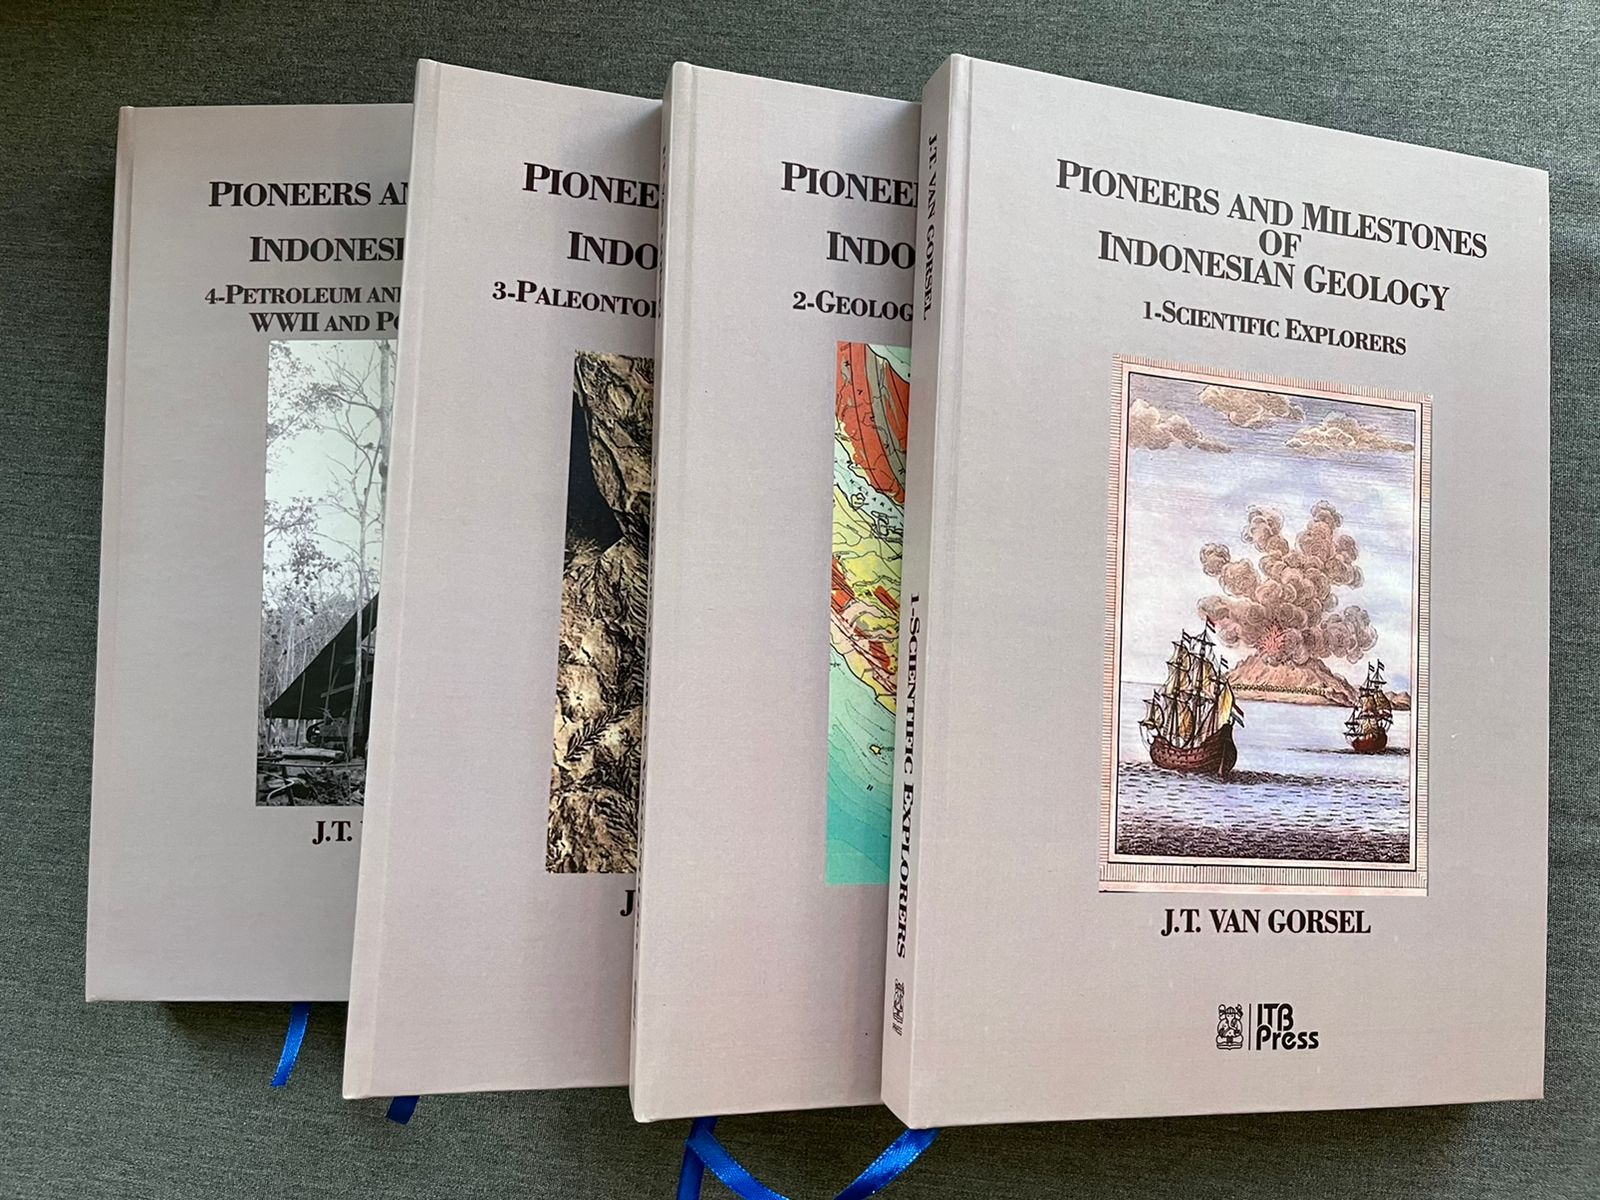 van Gorsel, 2022, Figure 2. The covers of the four volumes of Pioneers and milestones of Indonesian Geology